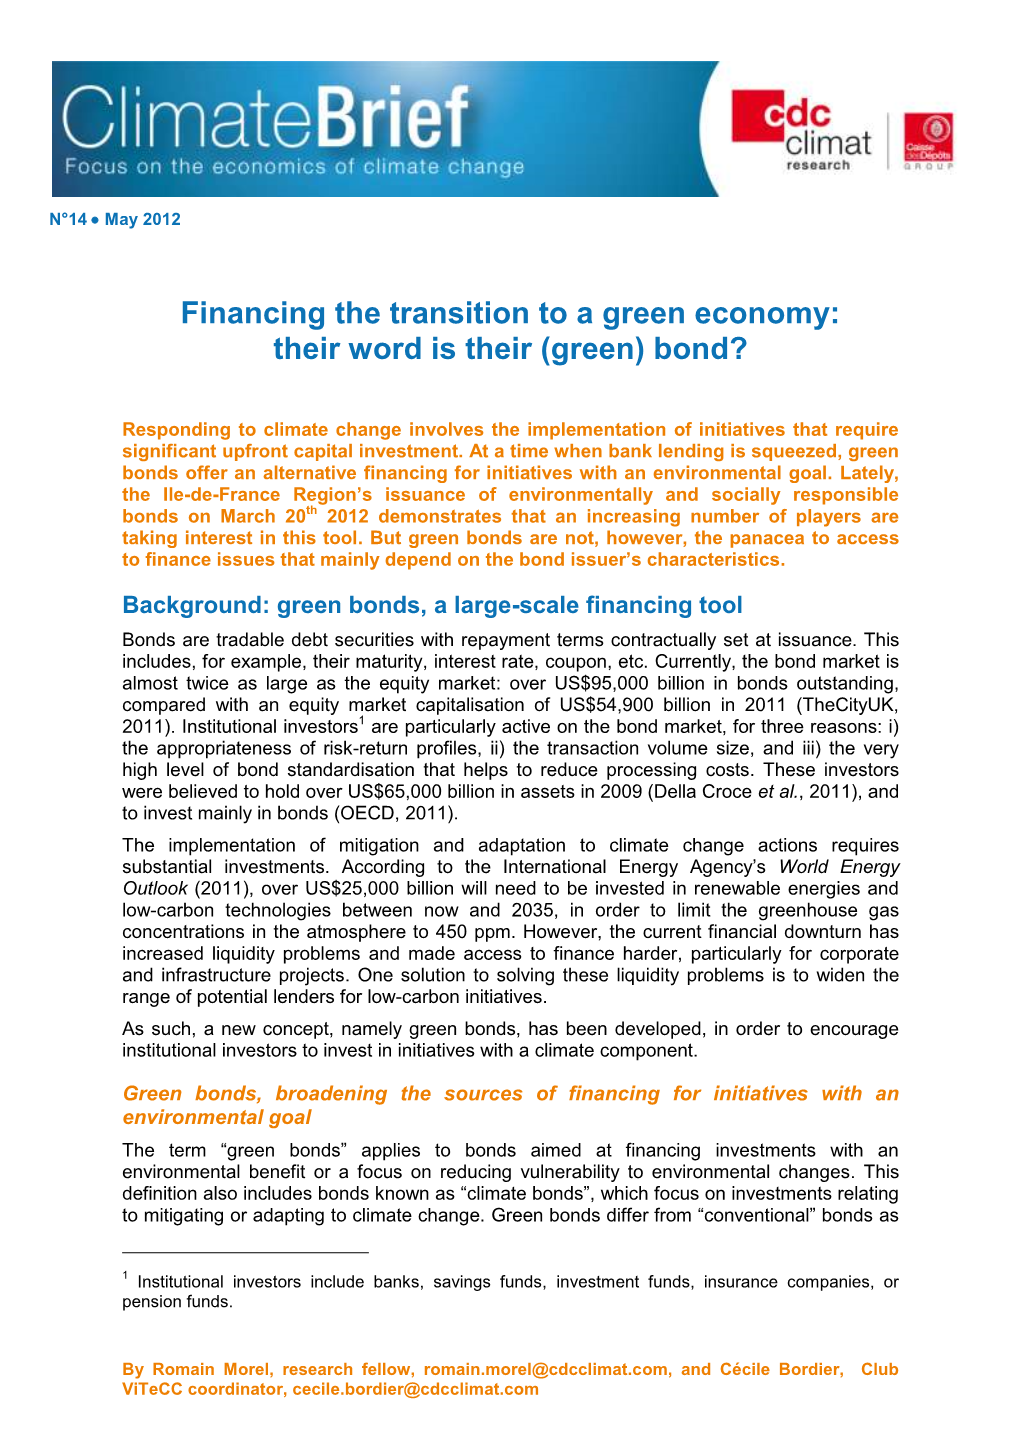 Financing the Transition to a Green Economy: Their Word Is Their (Green) Bond?